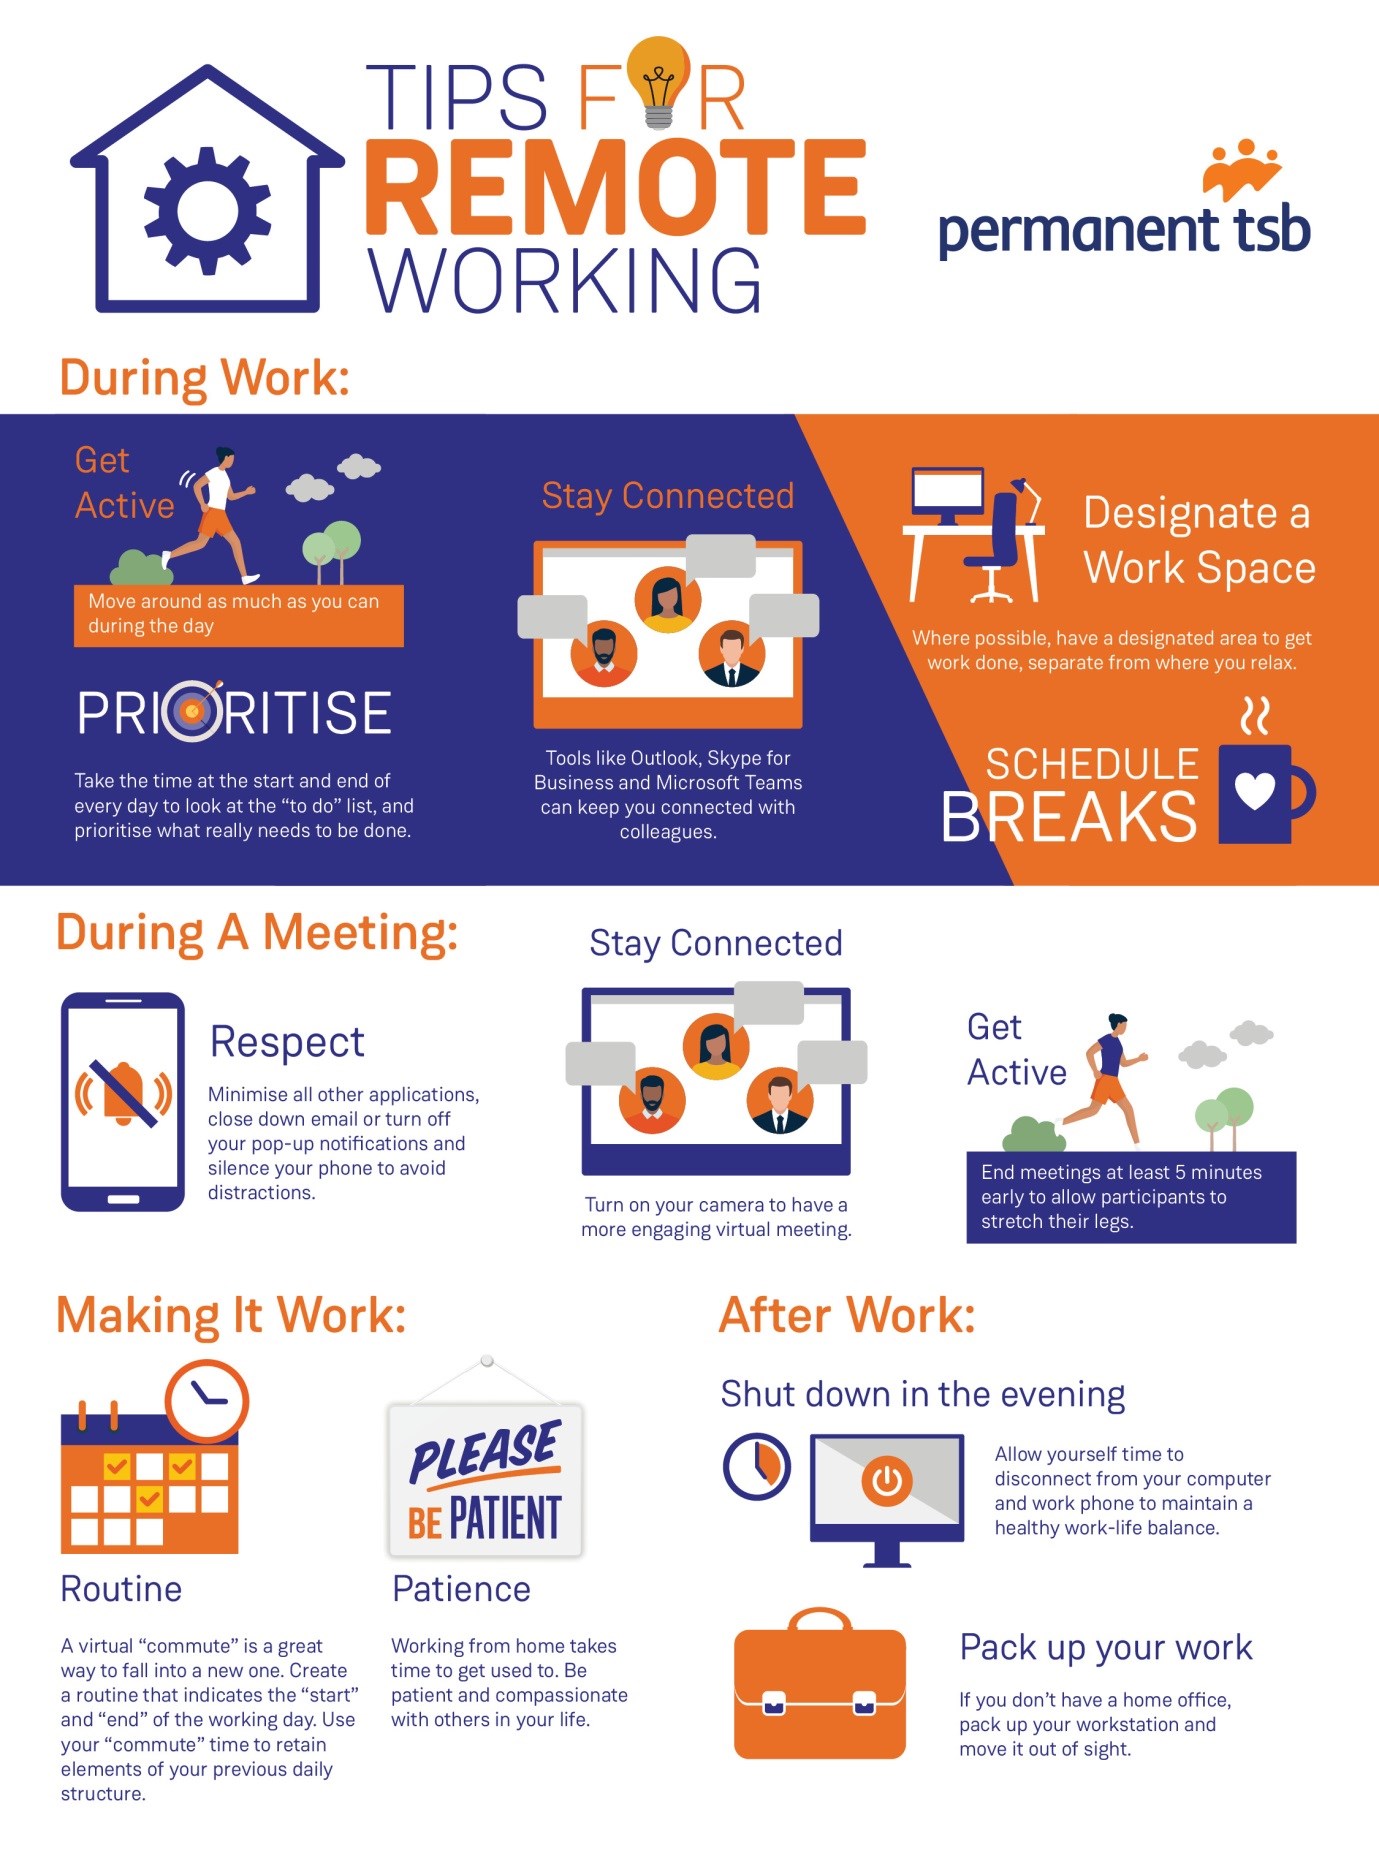 Infographic explaining a number of tips on how to work remotely